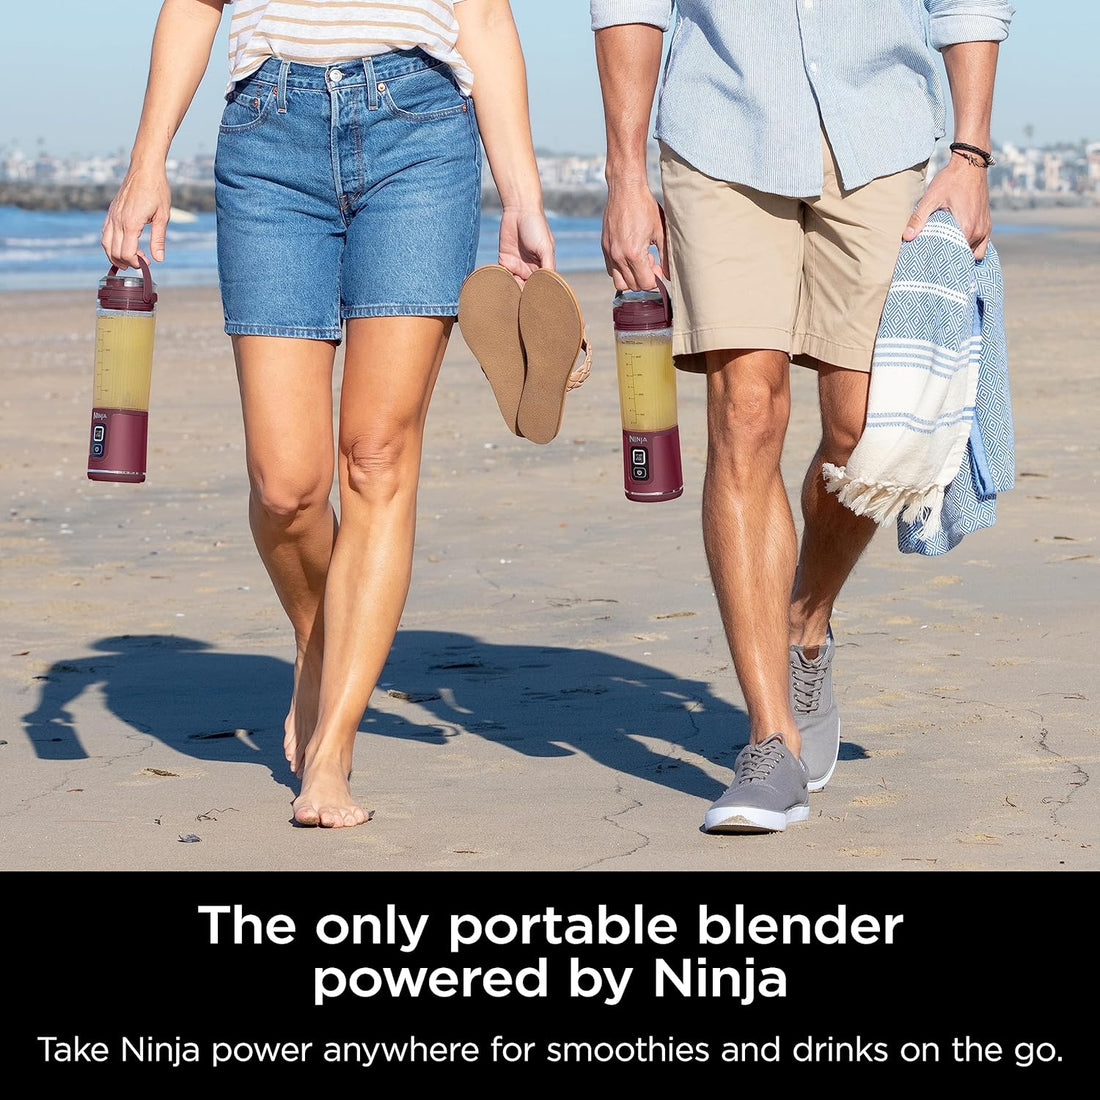 Ninja BC151CR Blast Portable Blender, Cordless, 18oz. Vessel, Personal Blender for Shakes & Smoothies, BPA Free, Leakproof Lid & Sip Spout, USB-C Rechargeable, Dishwasher Safe Parts, Cranberry Red